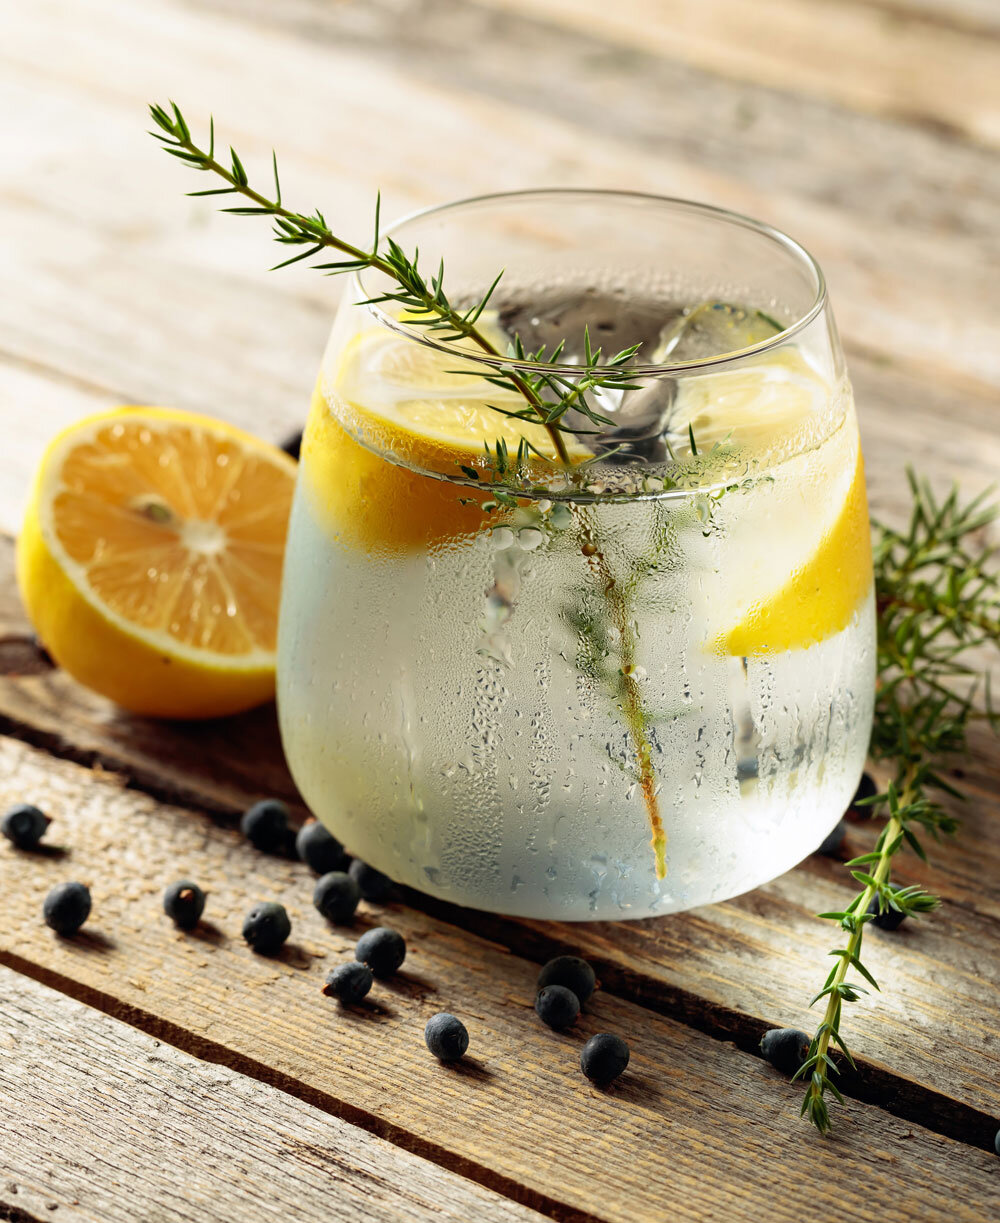 Stemless teardrop-shaped glass of ice water with lemon and rosemary garnish, embodying Joel Catering's organic and natural presentation style in New Orleans